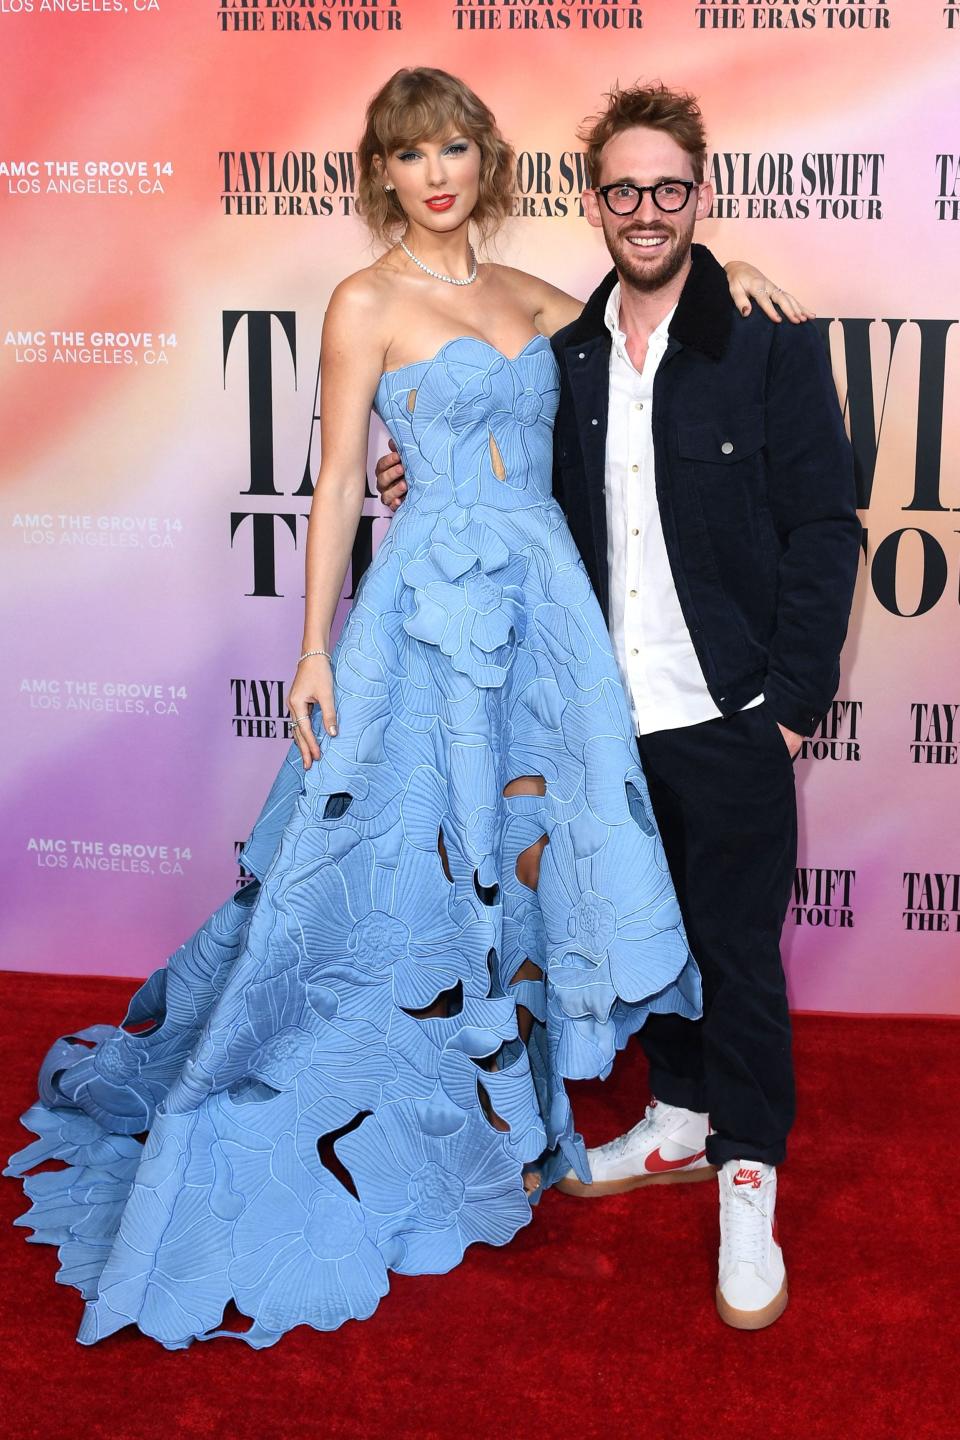 Taylor Swift and filmmaker Sam Wrench arrive for the "Taylor Swift: The Eras Tour" concert movie world premiere in Los Angeles, California on October 11, 2023.